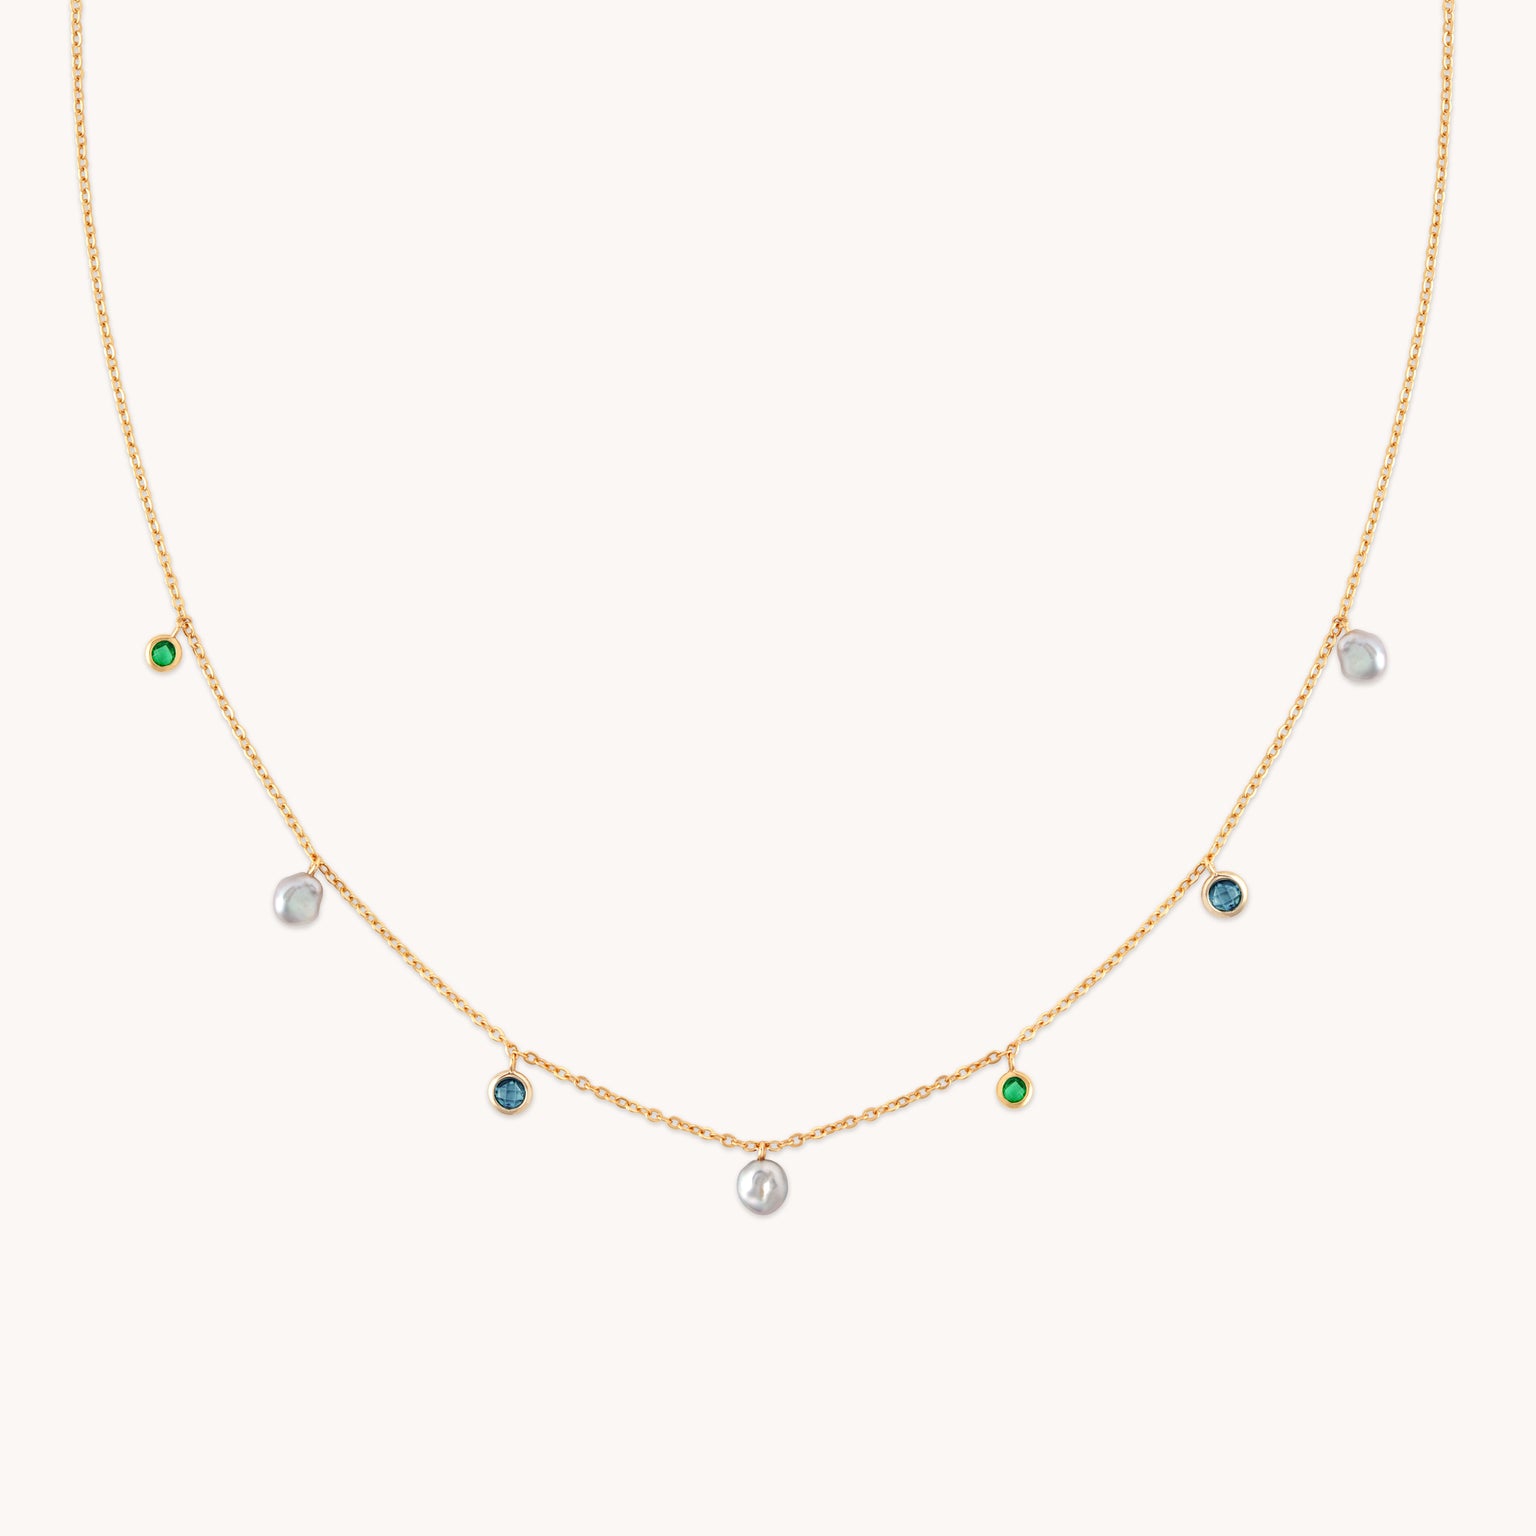 Tranquility Pearl Charm Necklace in Gold